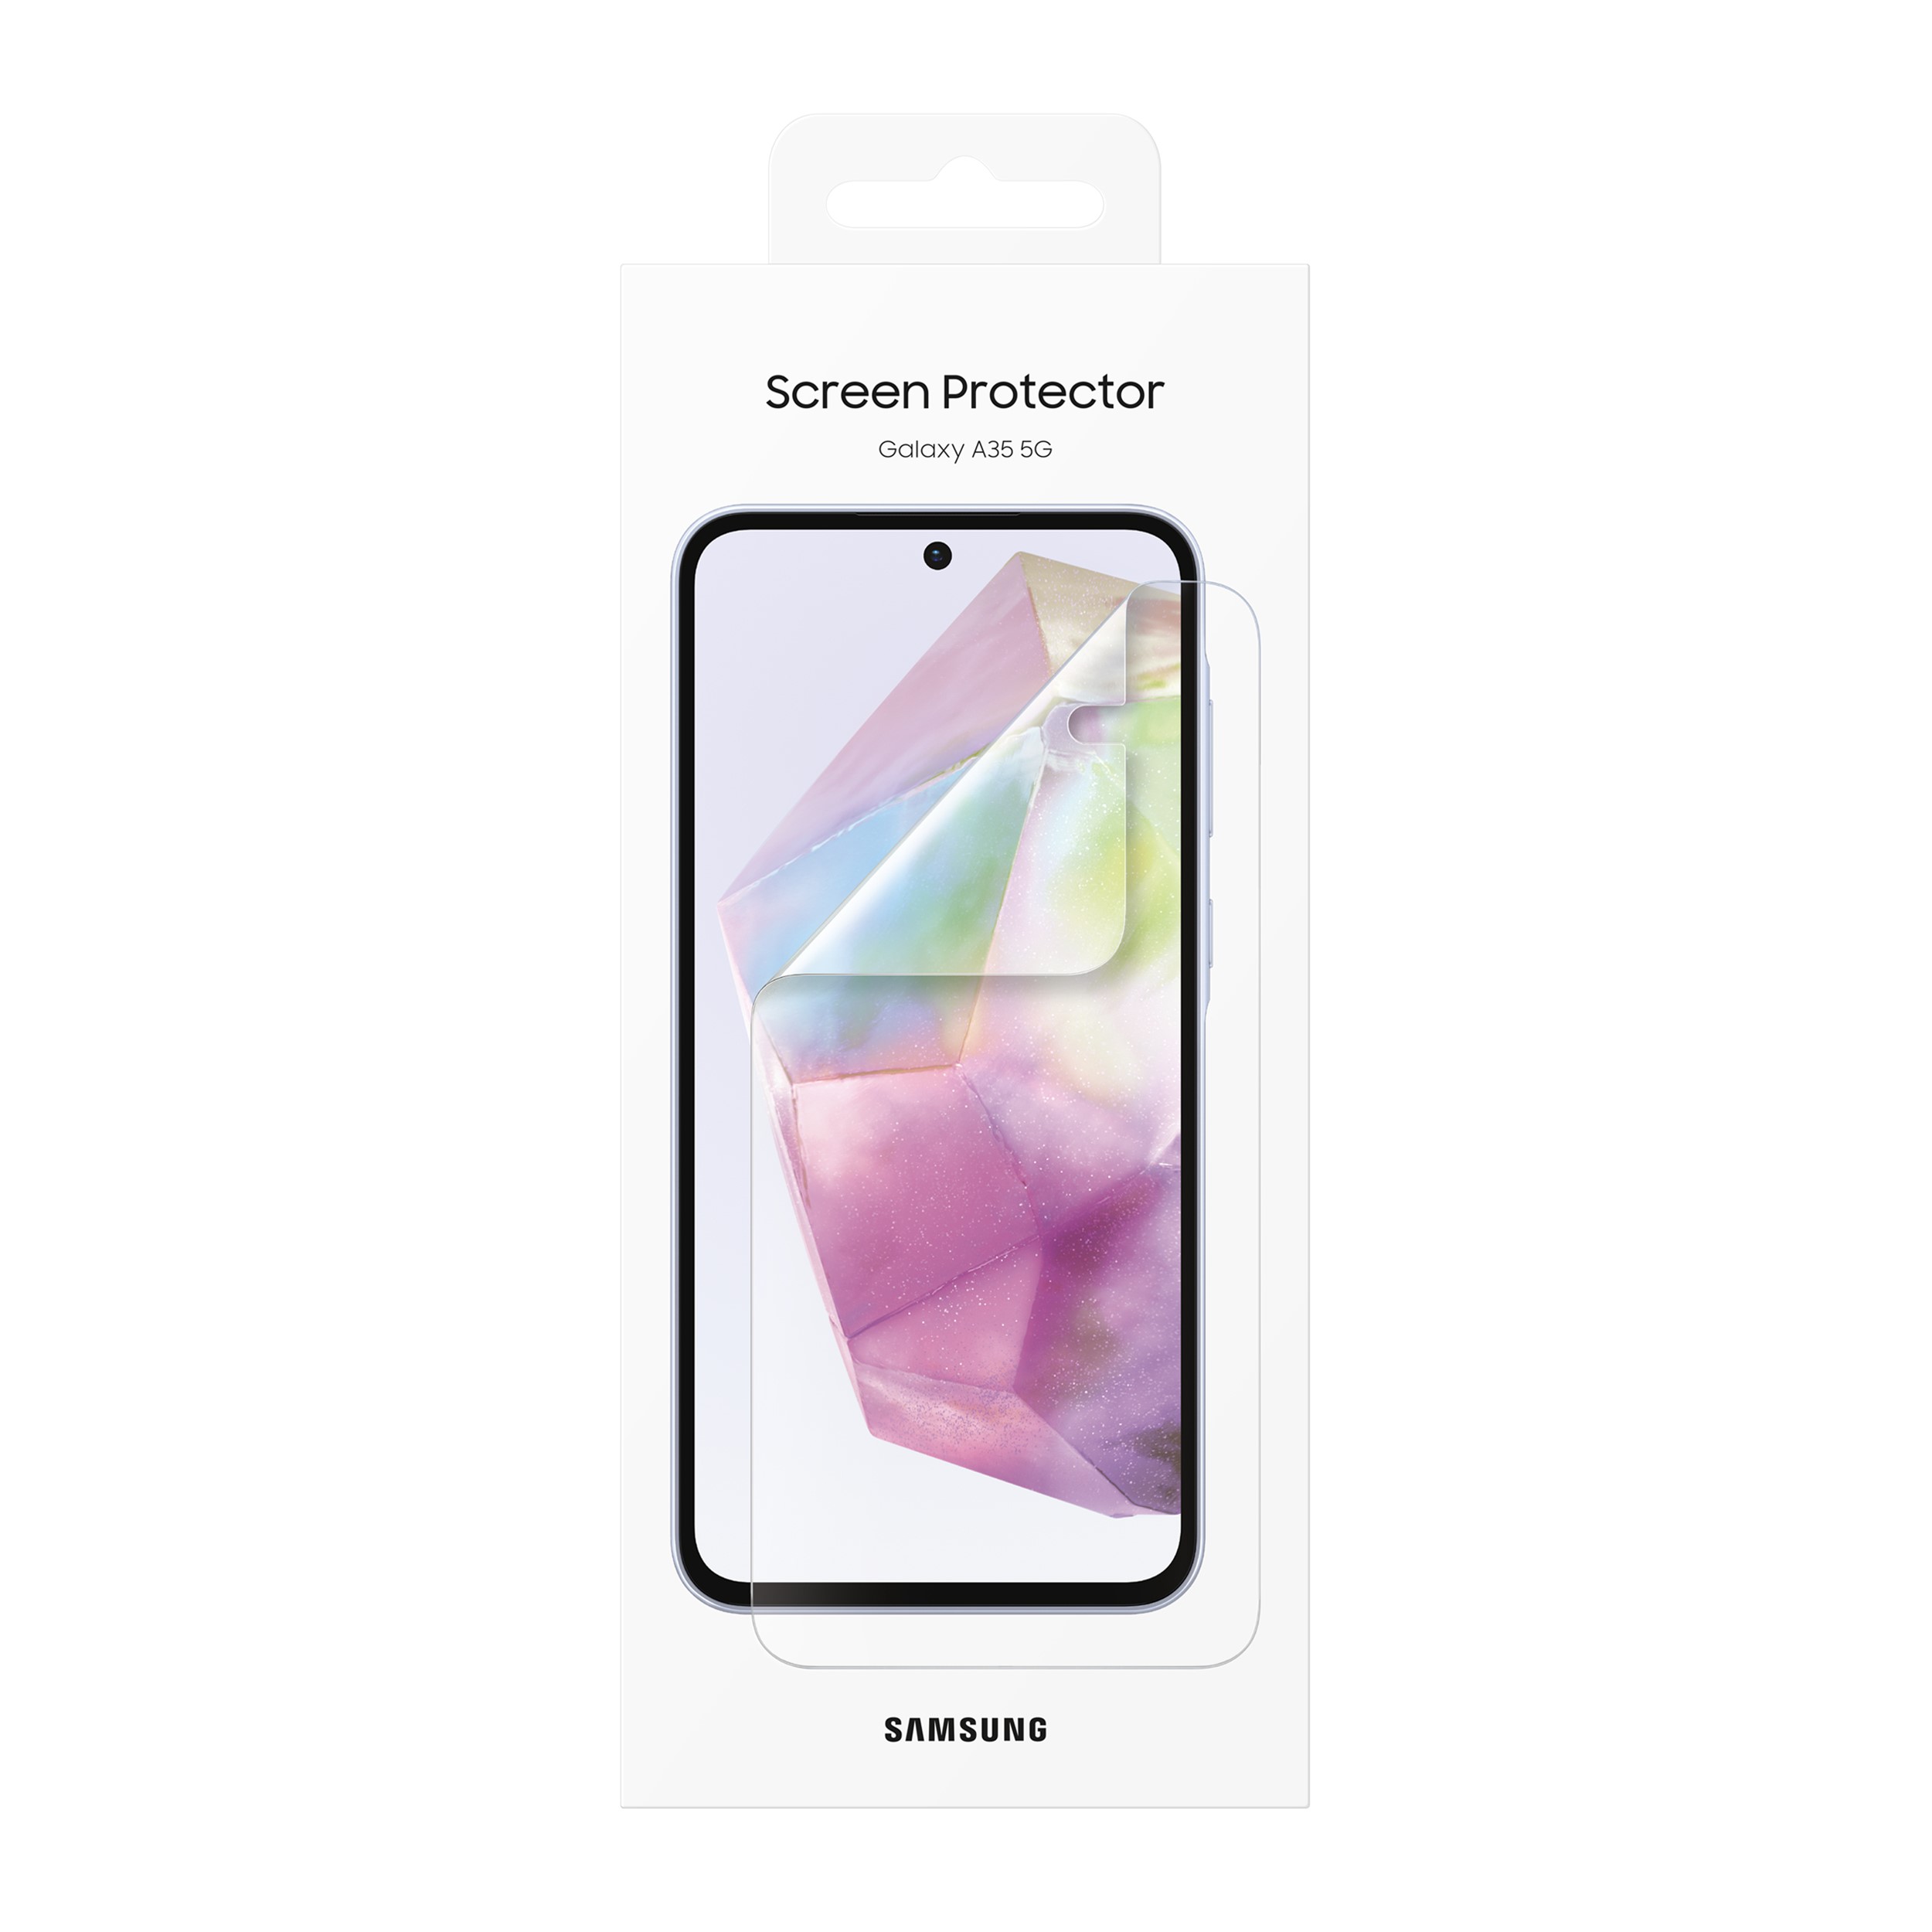 Samsung Galaxy A35 5G Screen Protector, , large image number 0